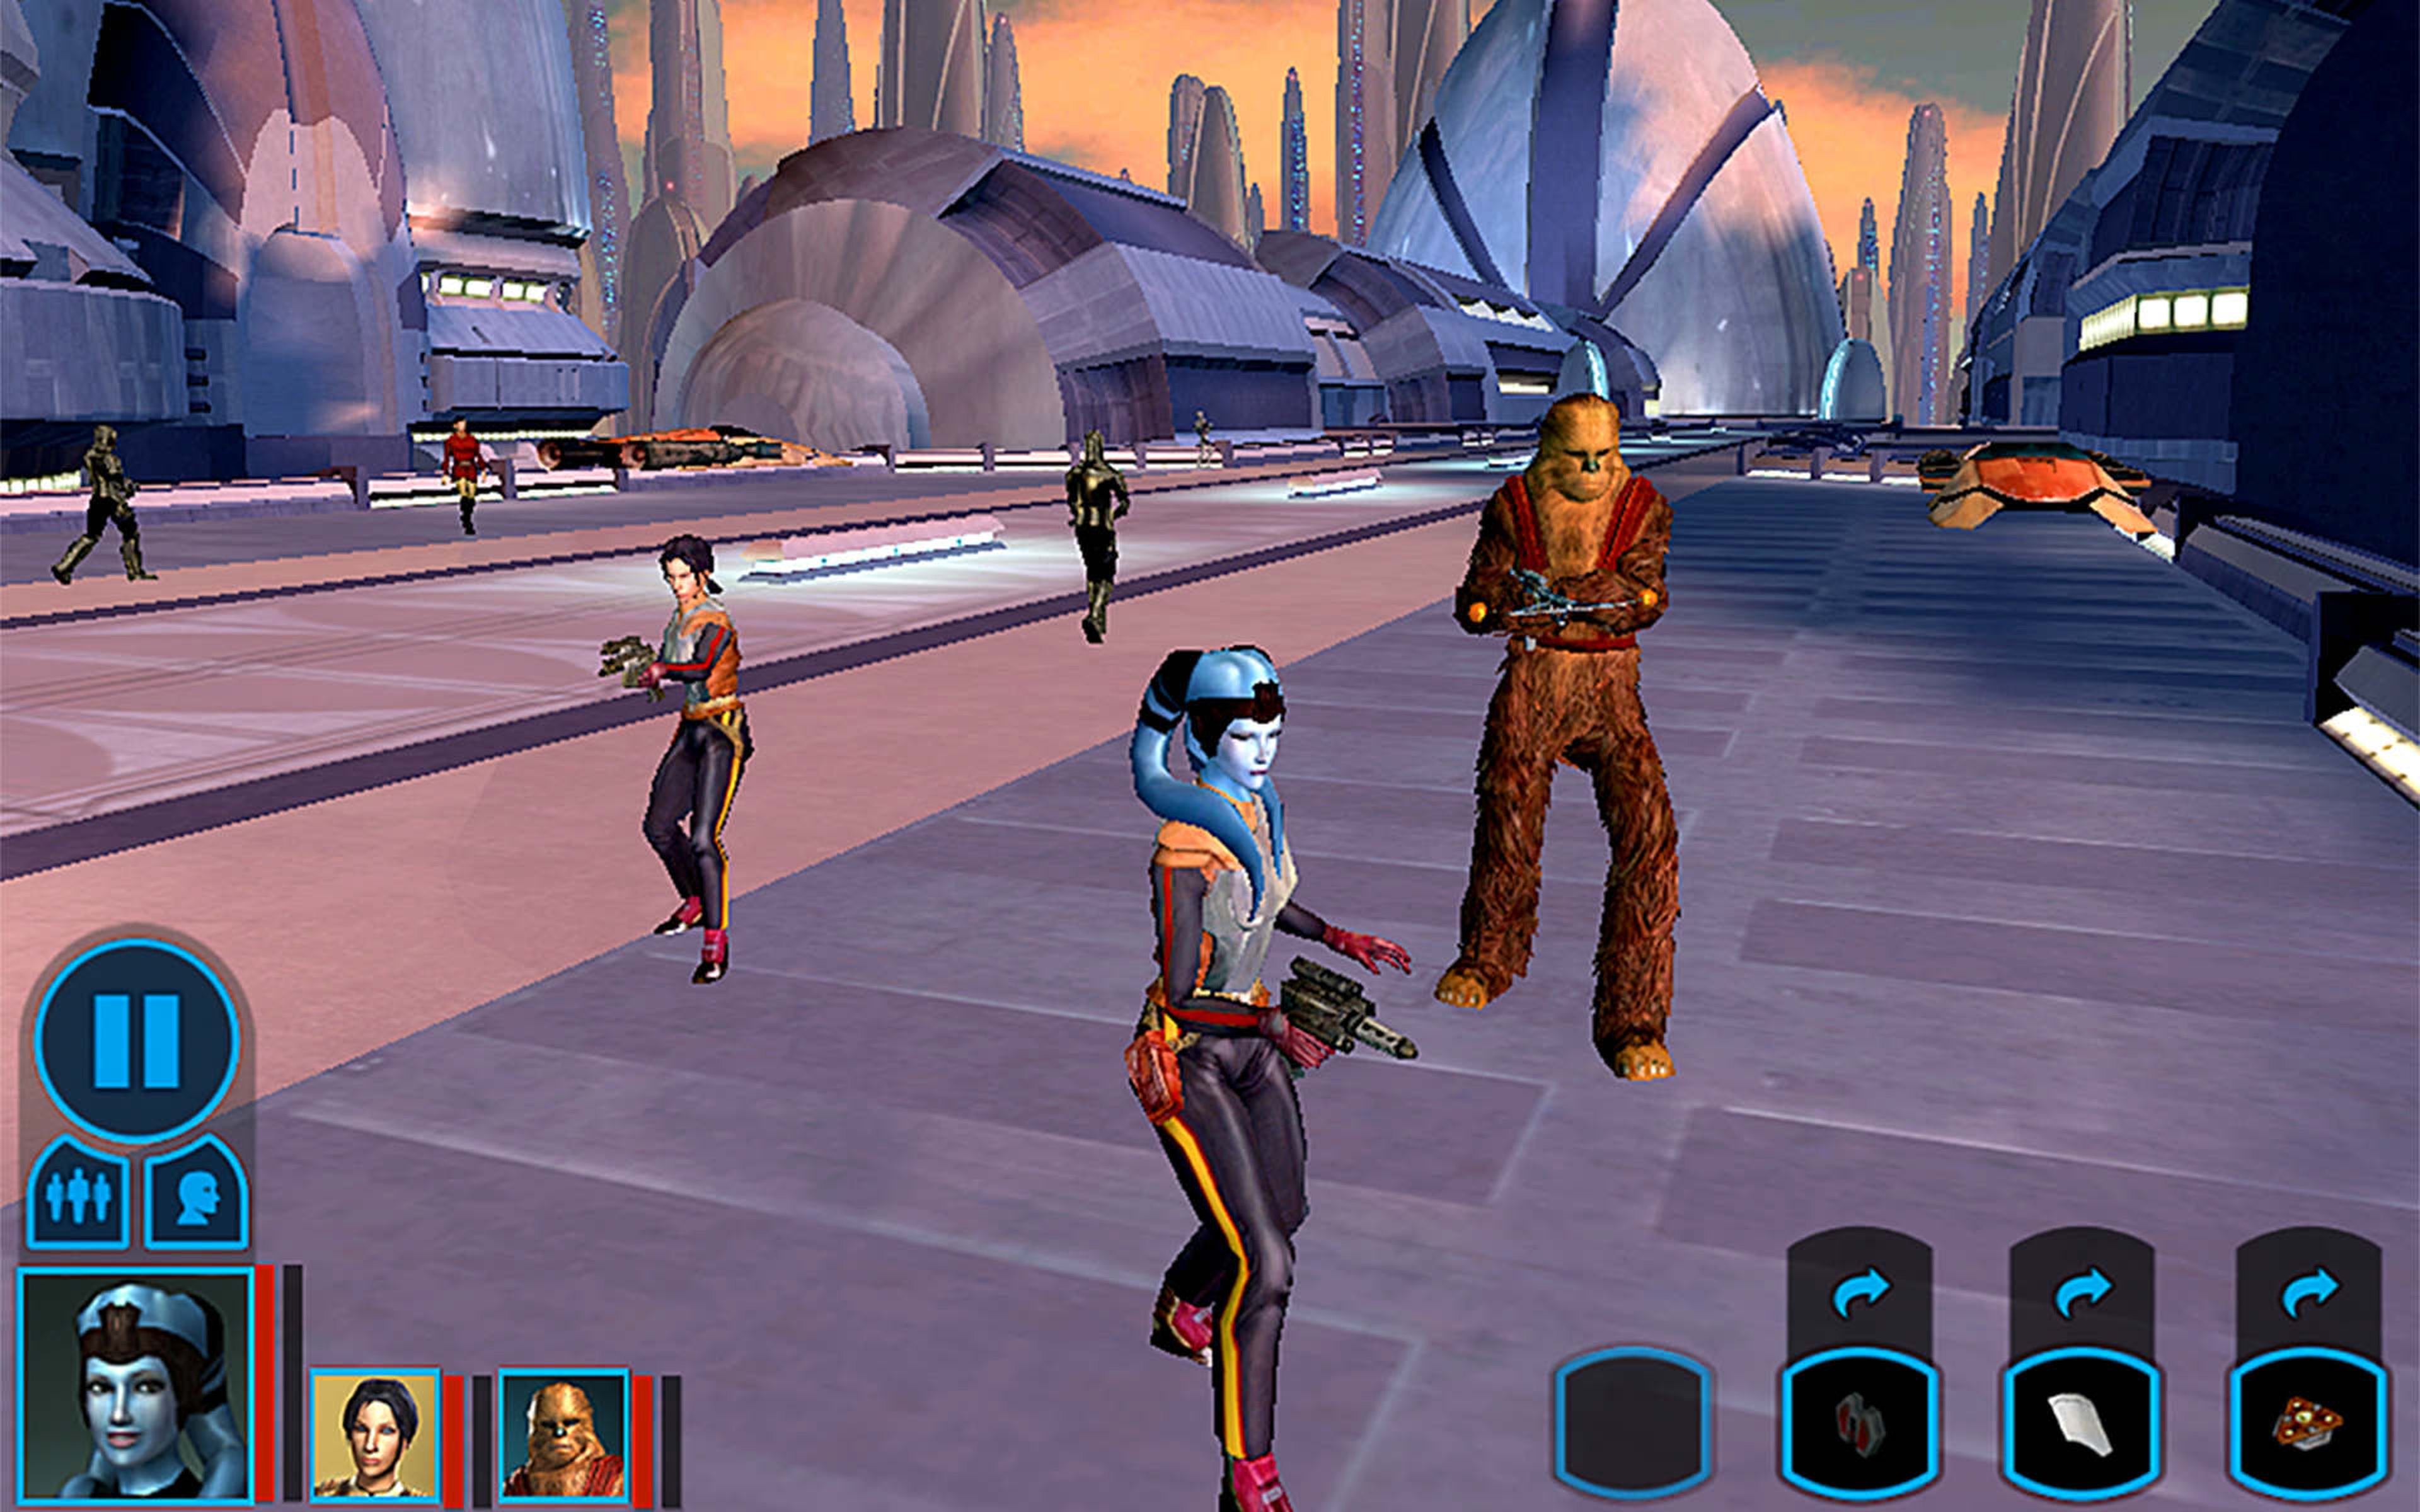 Игра star wars kotor. Star Wars kotor 1. Star Wars : Knights of the old Republic. Игра Star Wars Knights of the old Republic. Star Wars Knights of the old Republic 1.